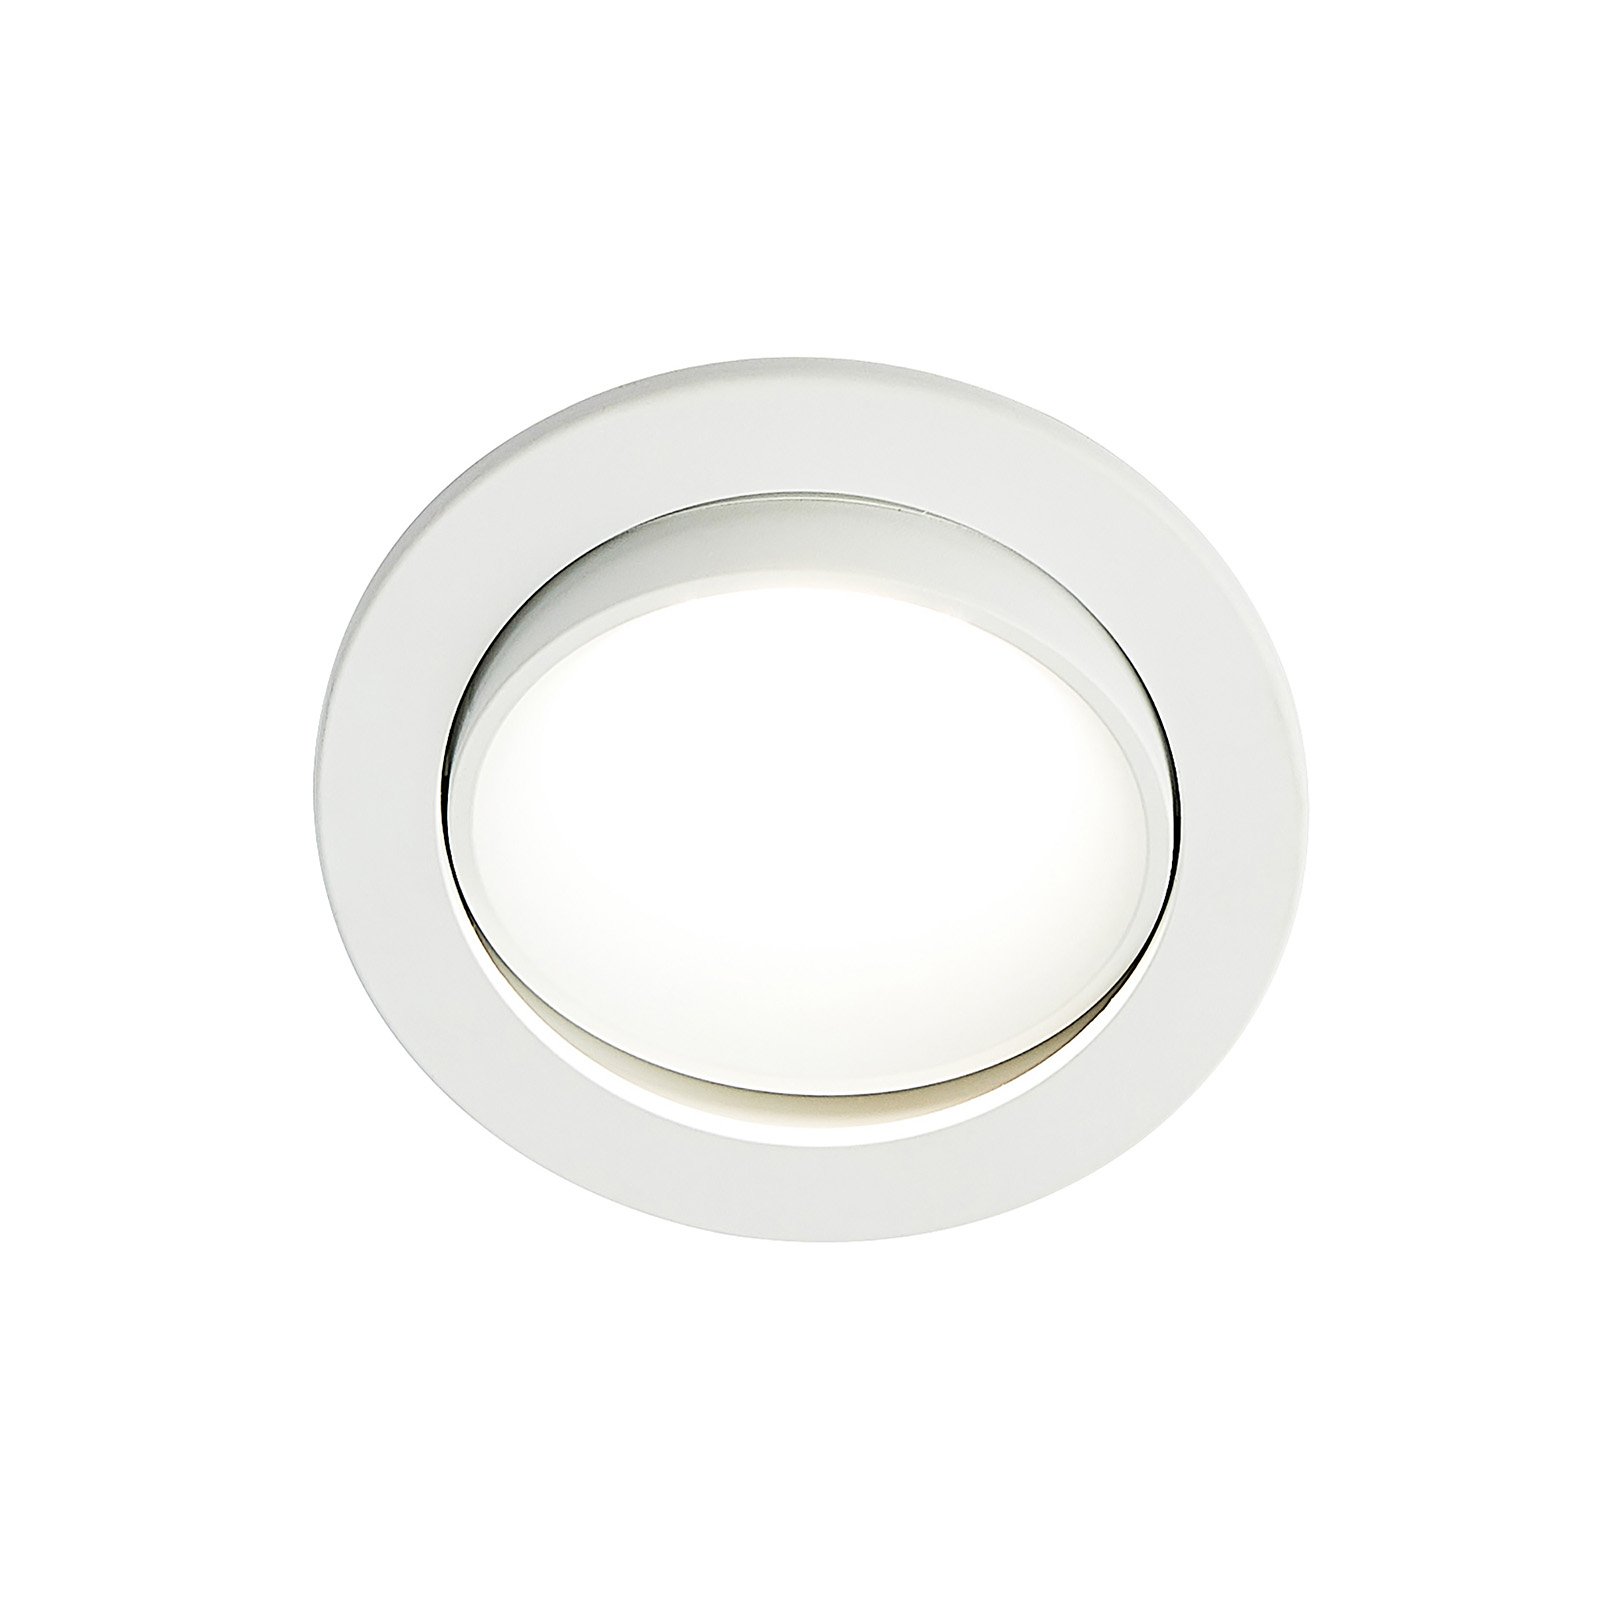 Arcchio Milaine lampe LED blanche, inclinable